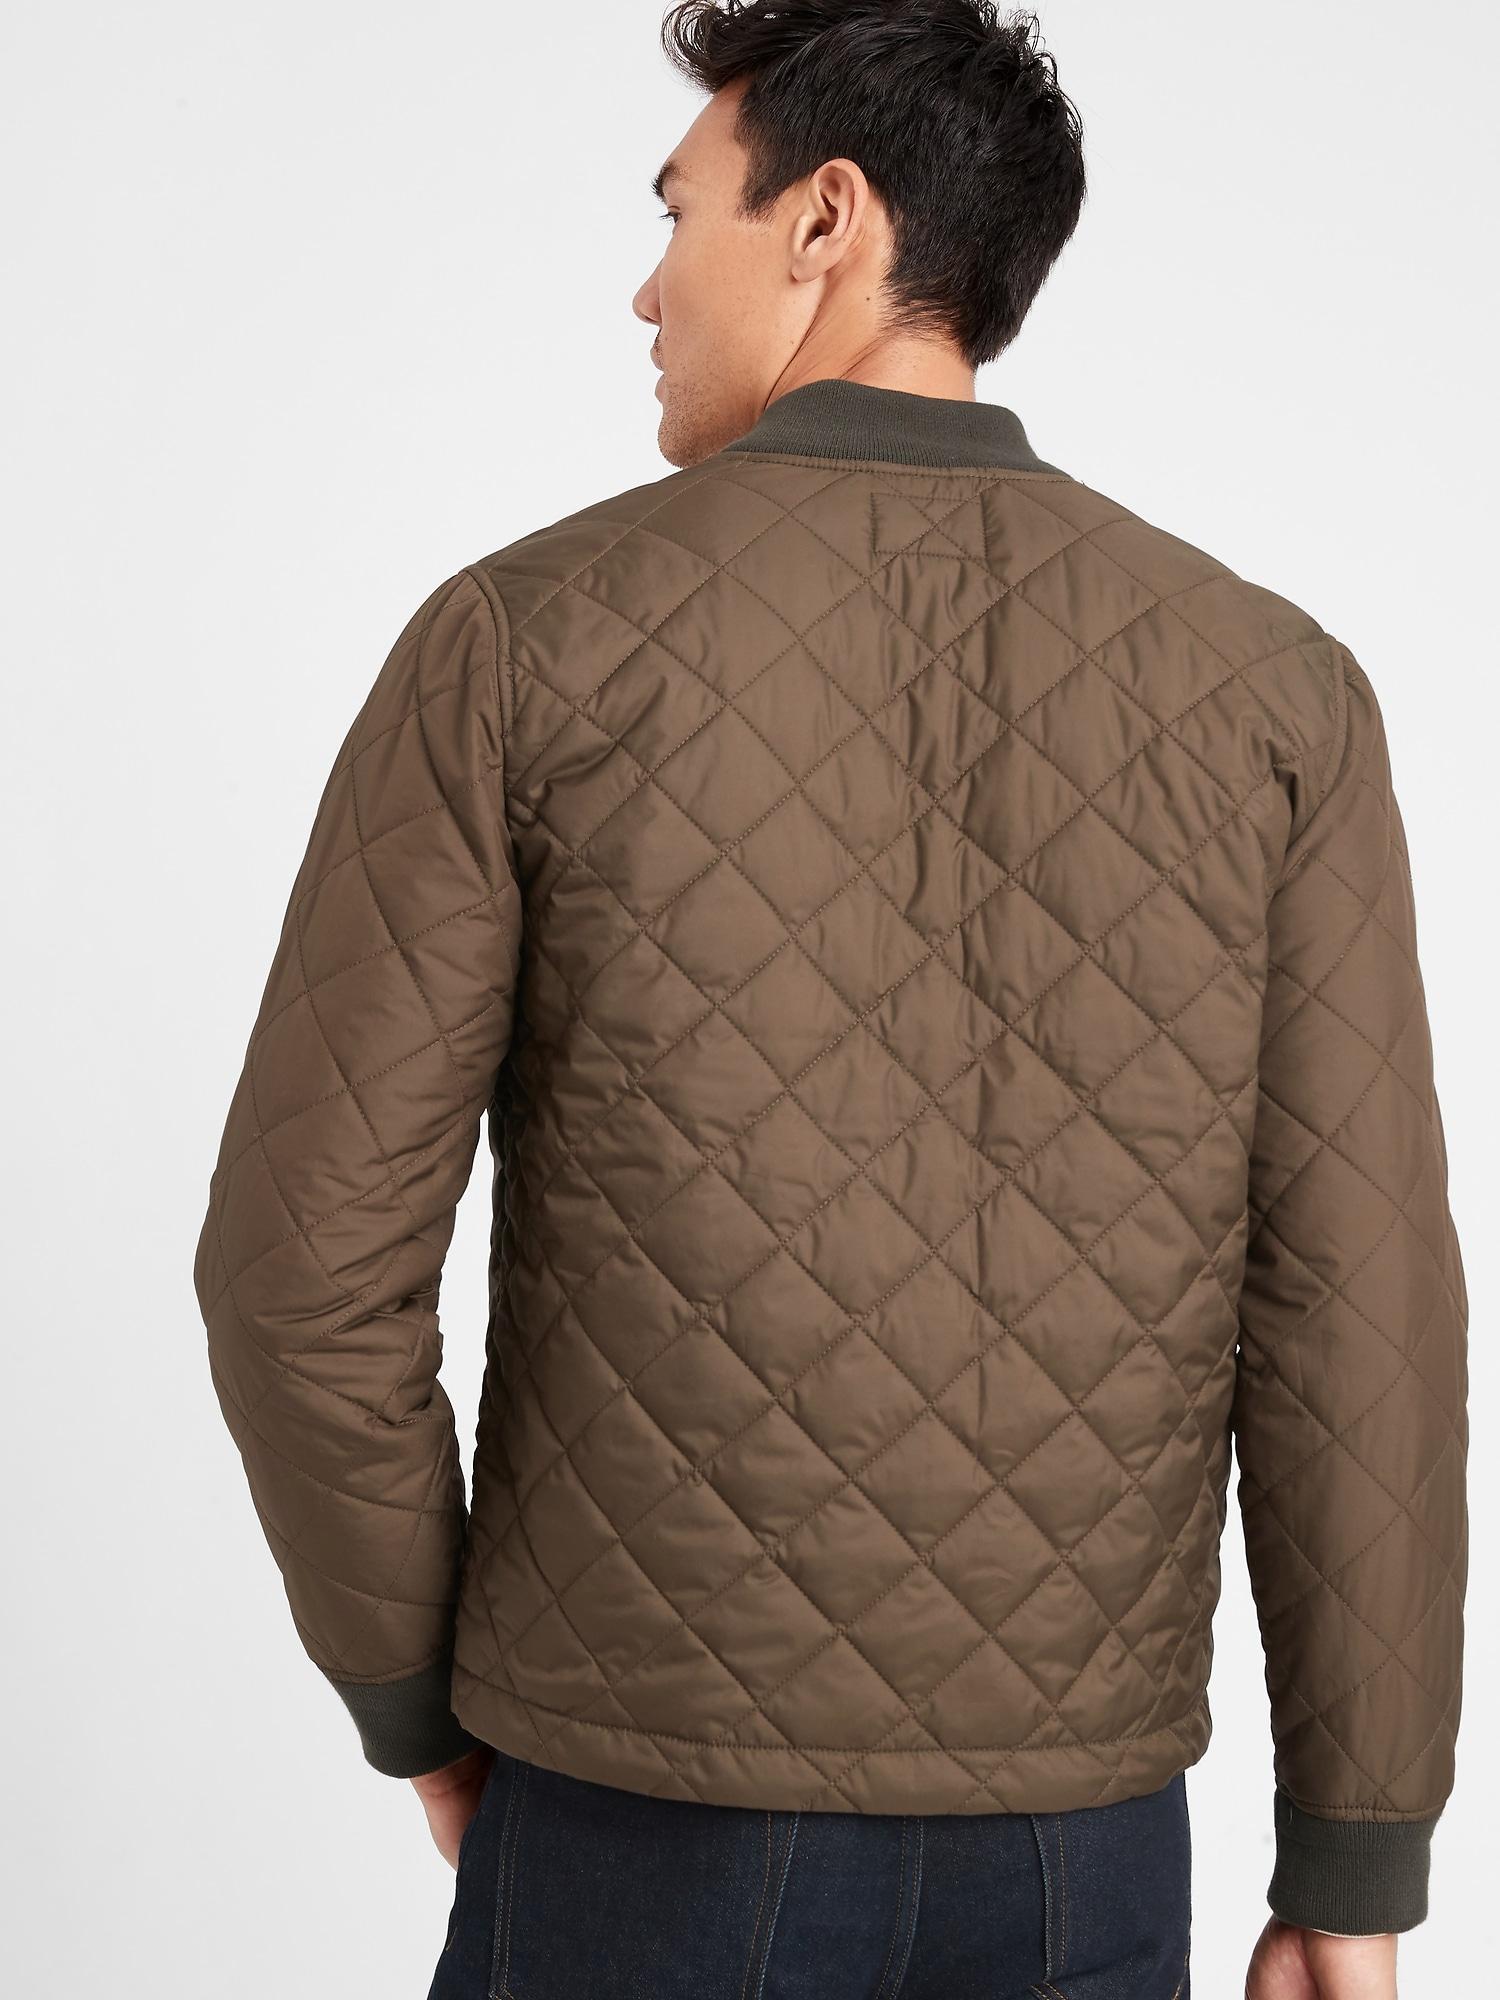 Banana Republic Synthetic Water-resistant Quilted Bomber Jacket for Men ...